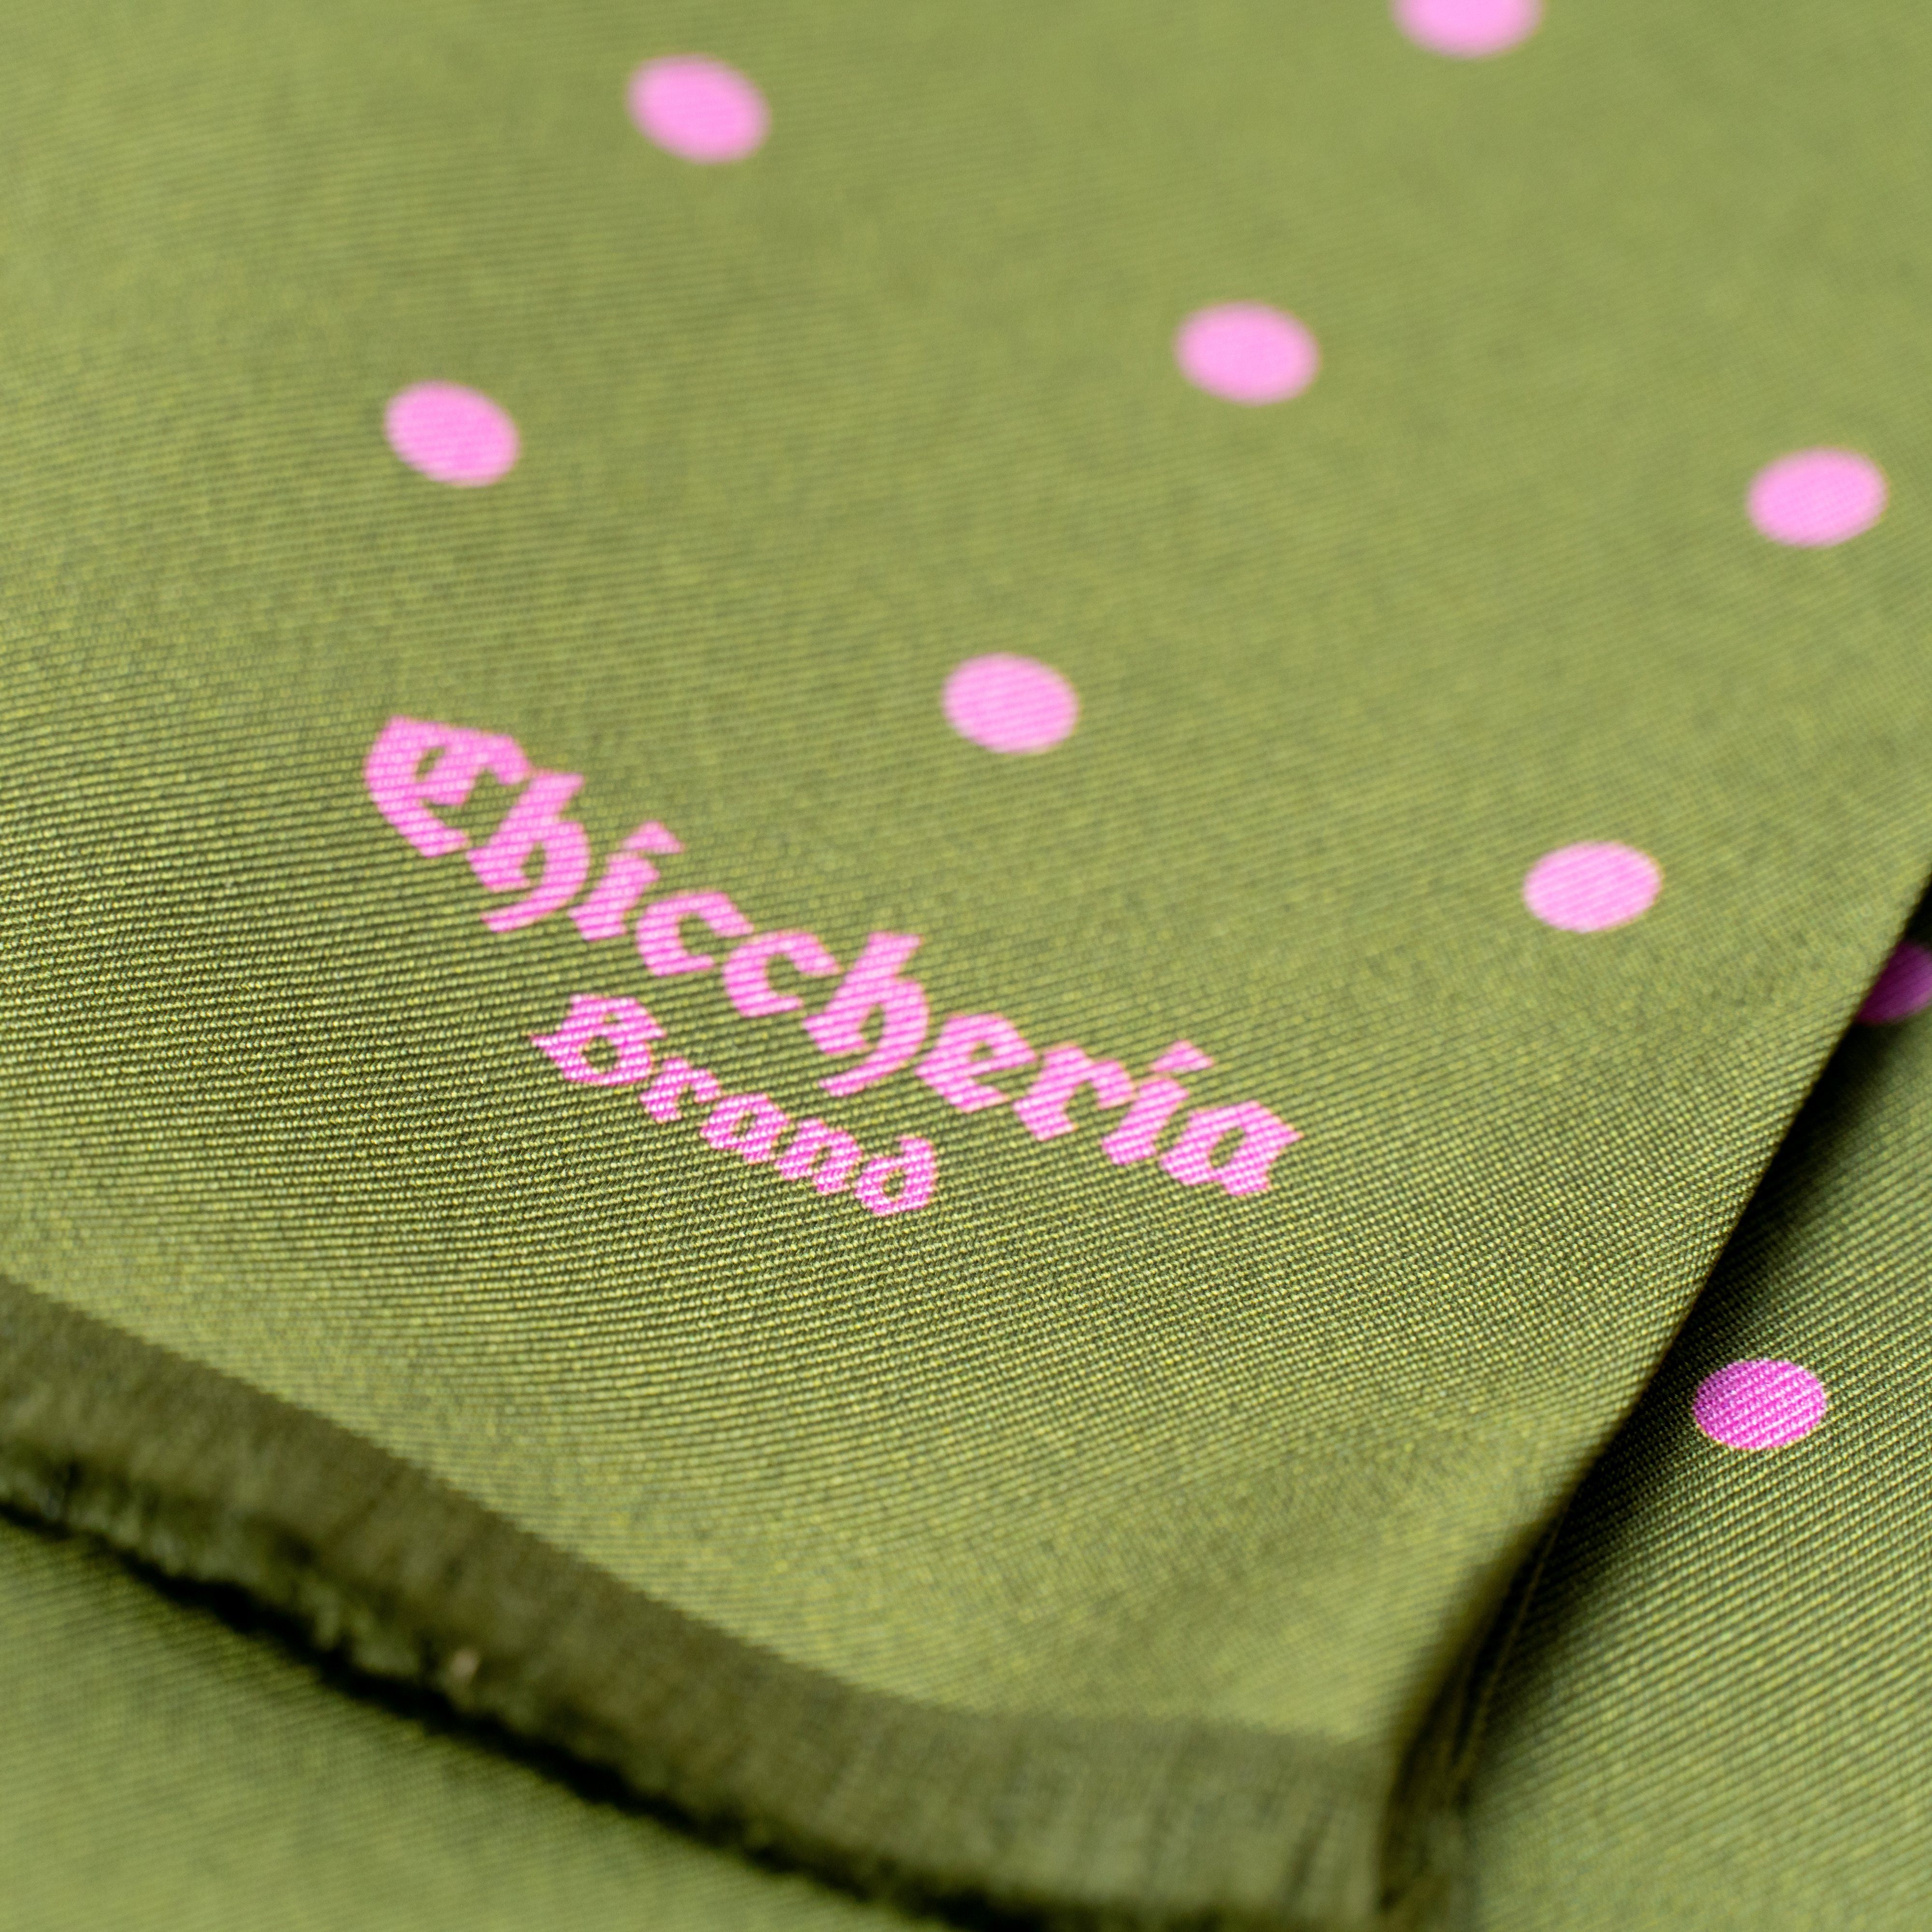 Seidenschal Italy in Brand Made Oliv Chiccheria BIG-DOTS,